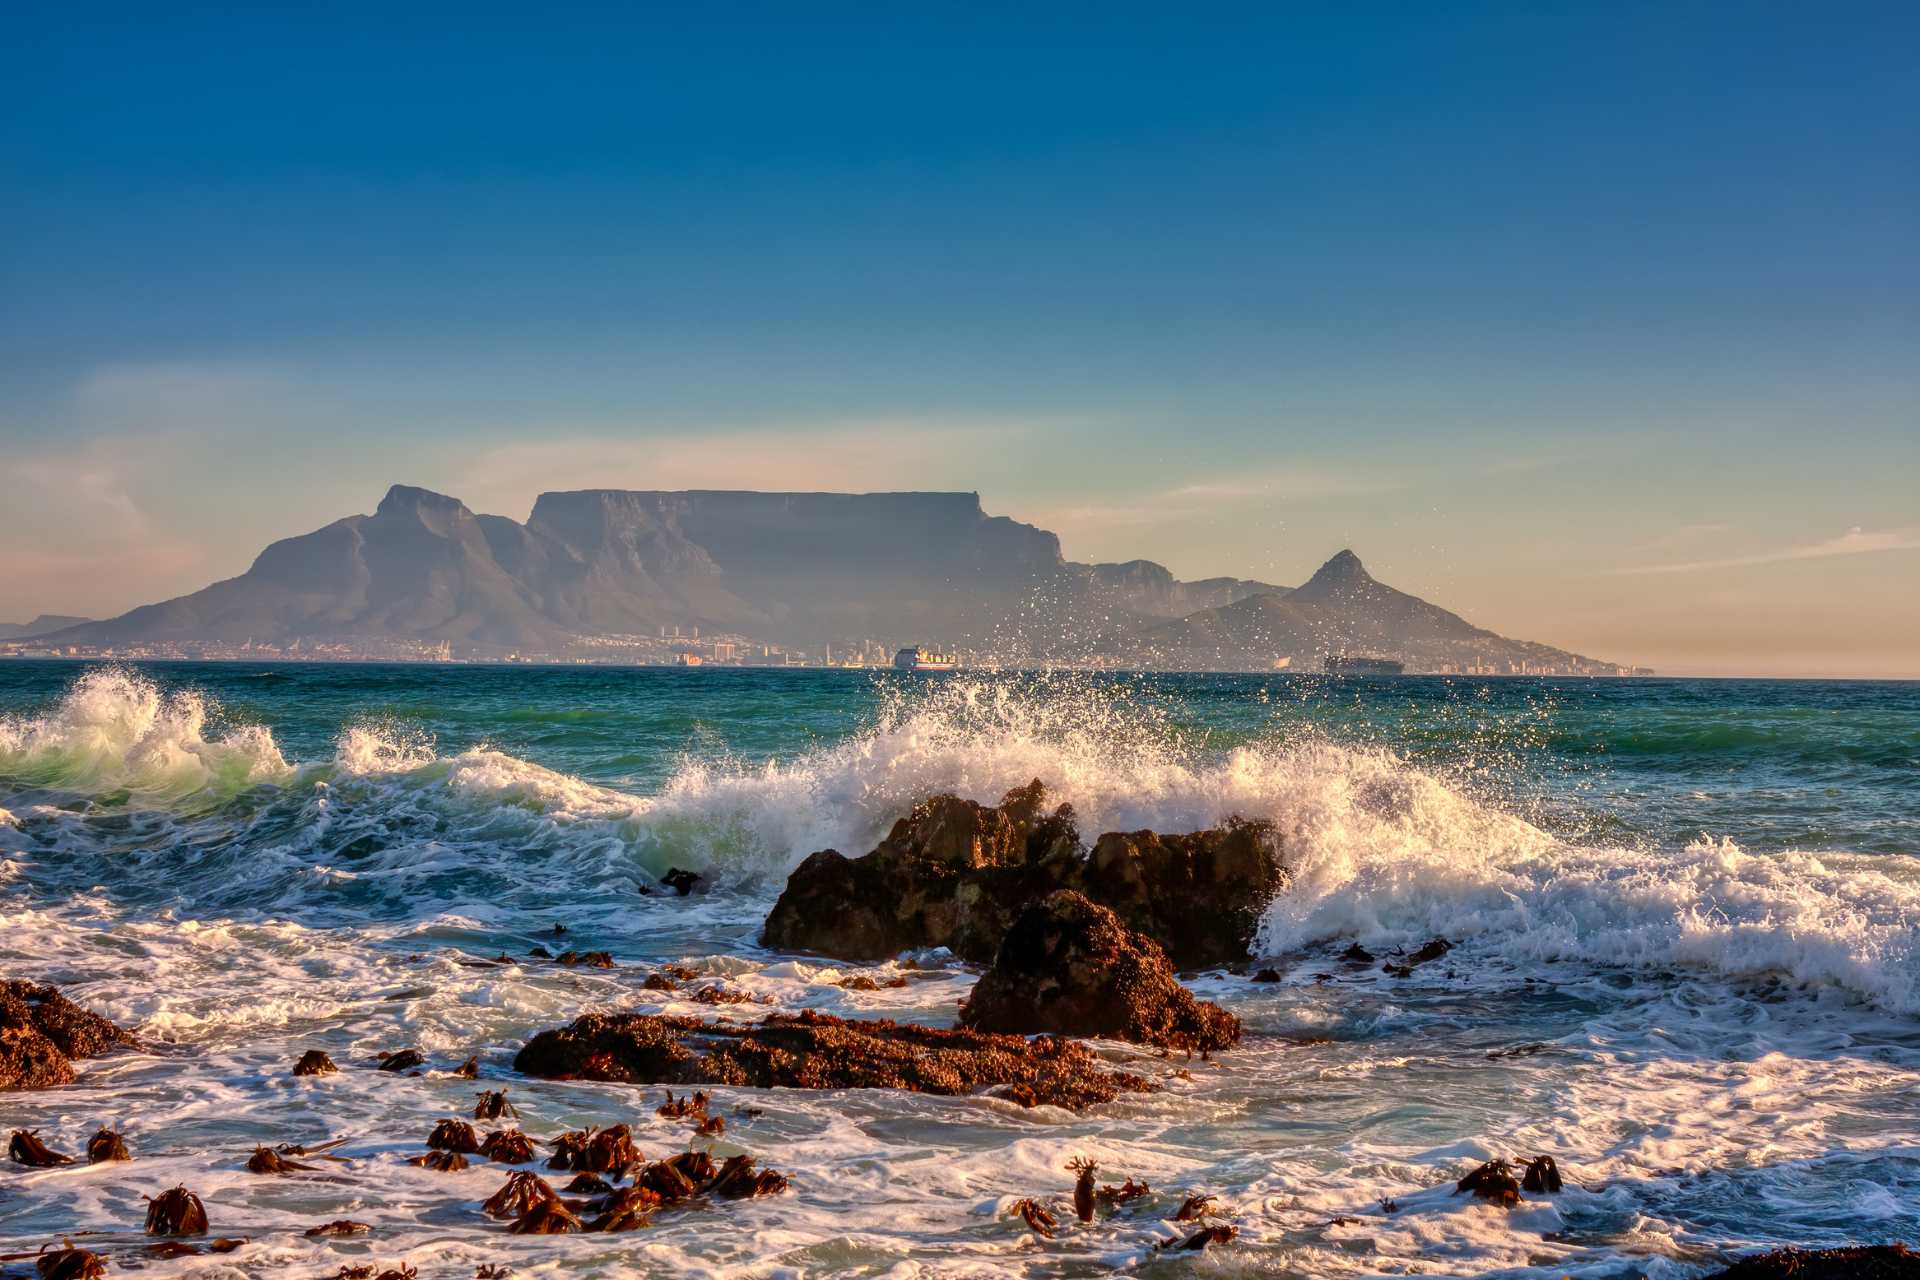 Table Mountain in South Africa ©Getty Images